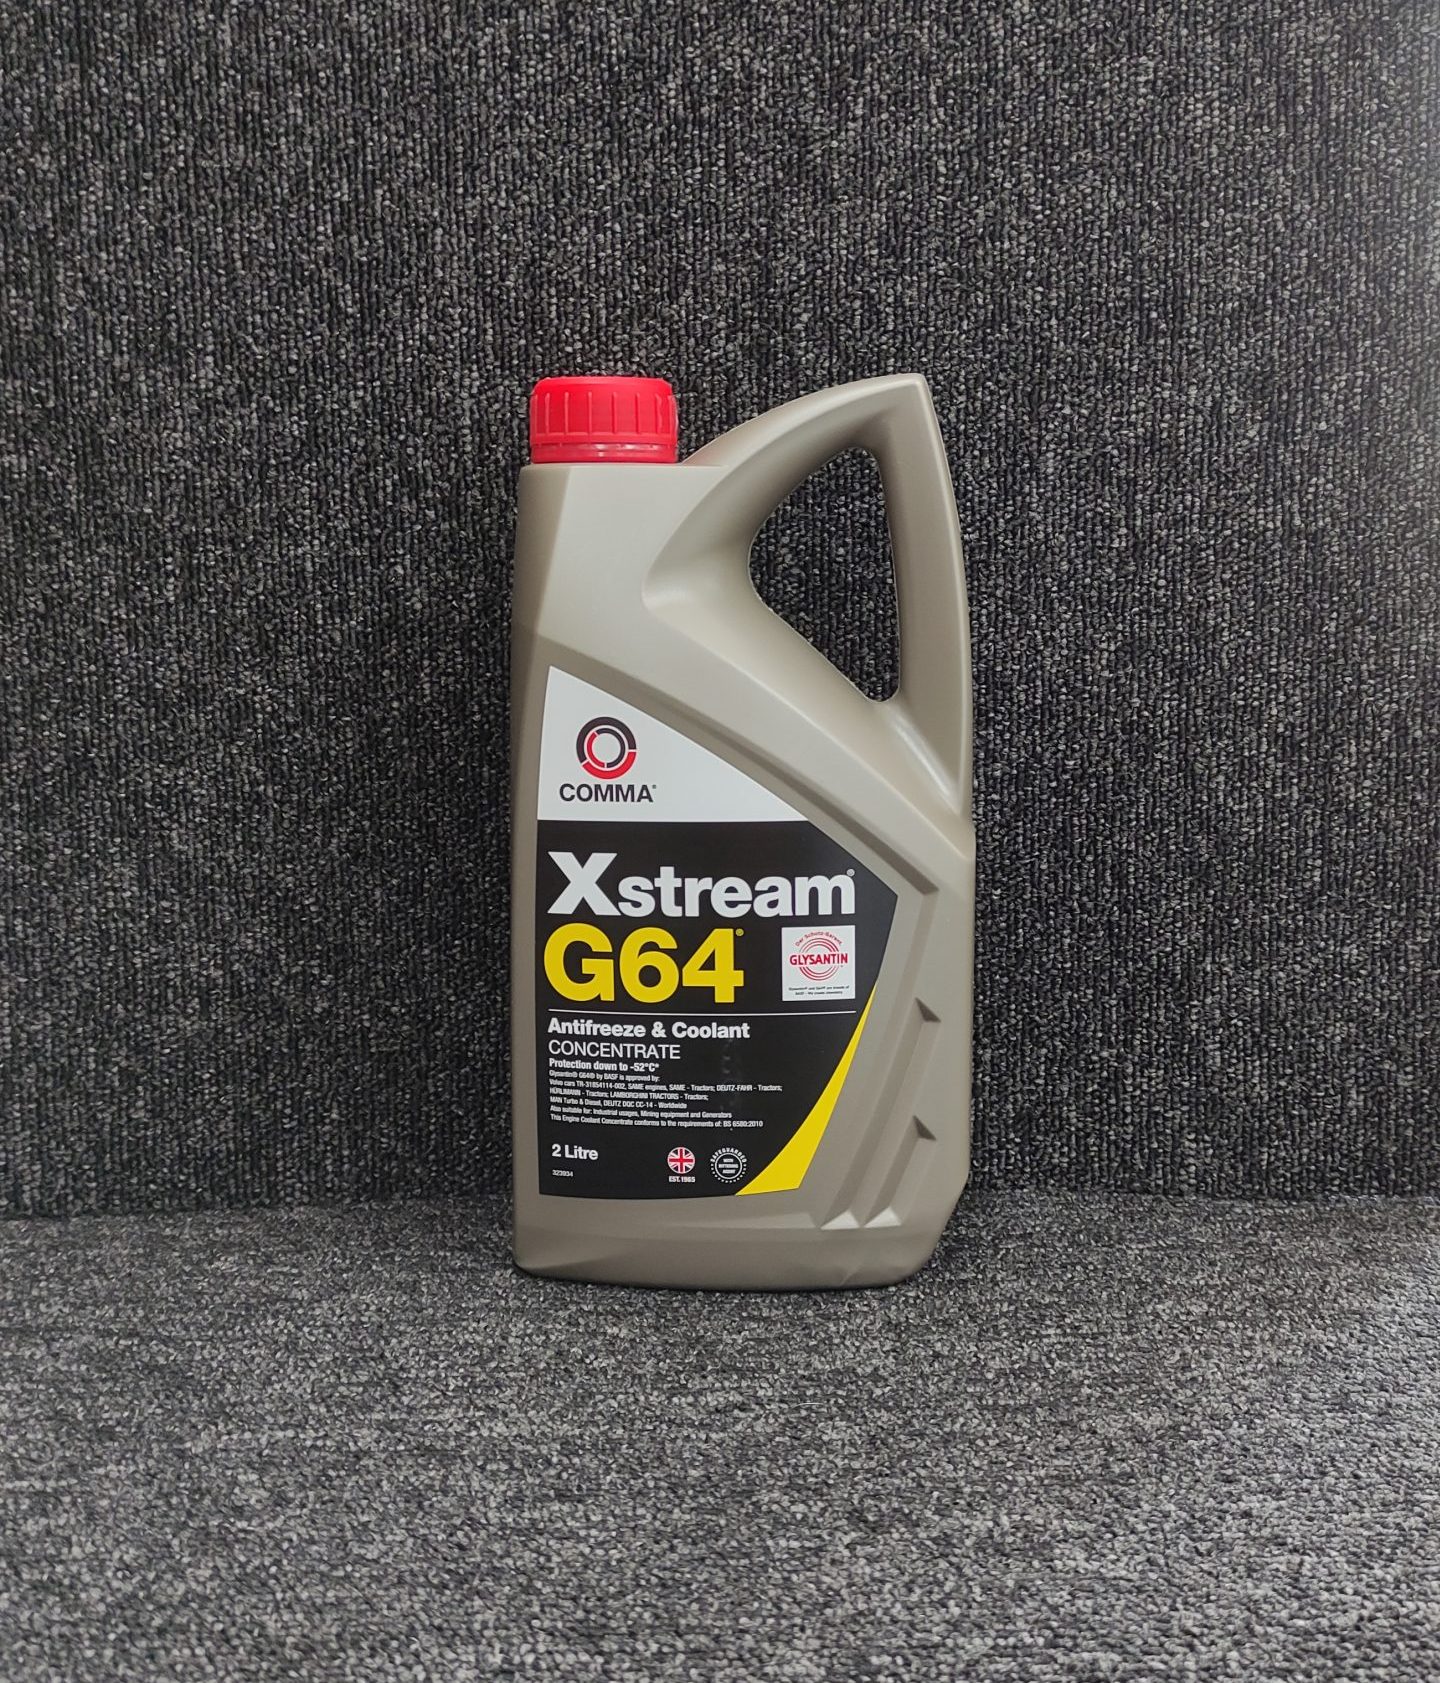 Comma Xstream G64 Concentrated Coolant